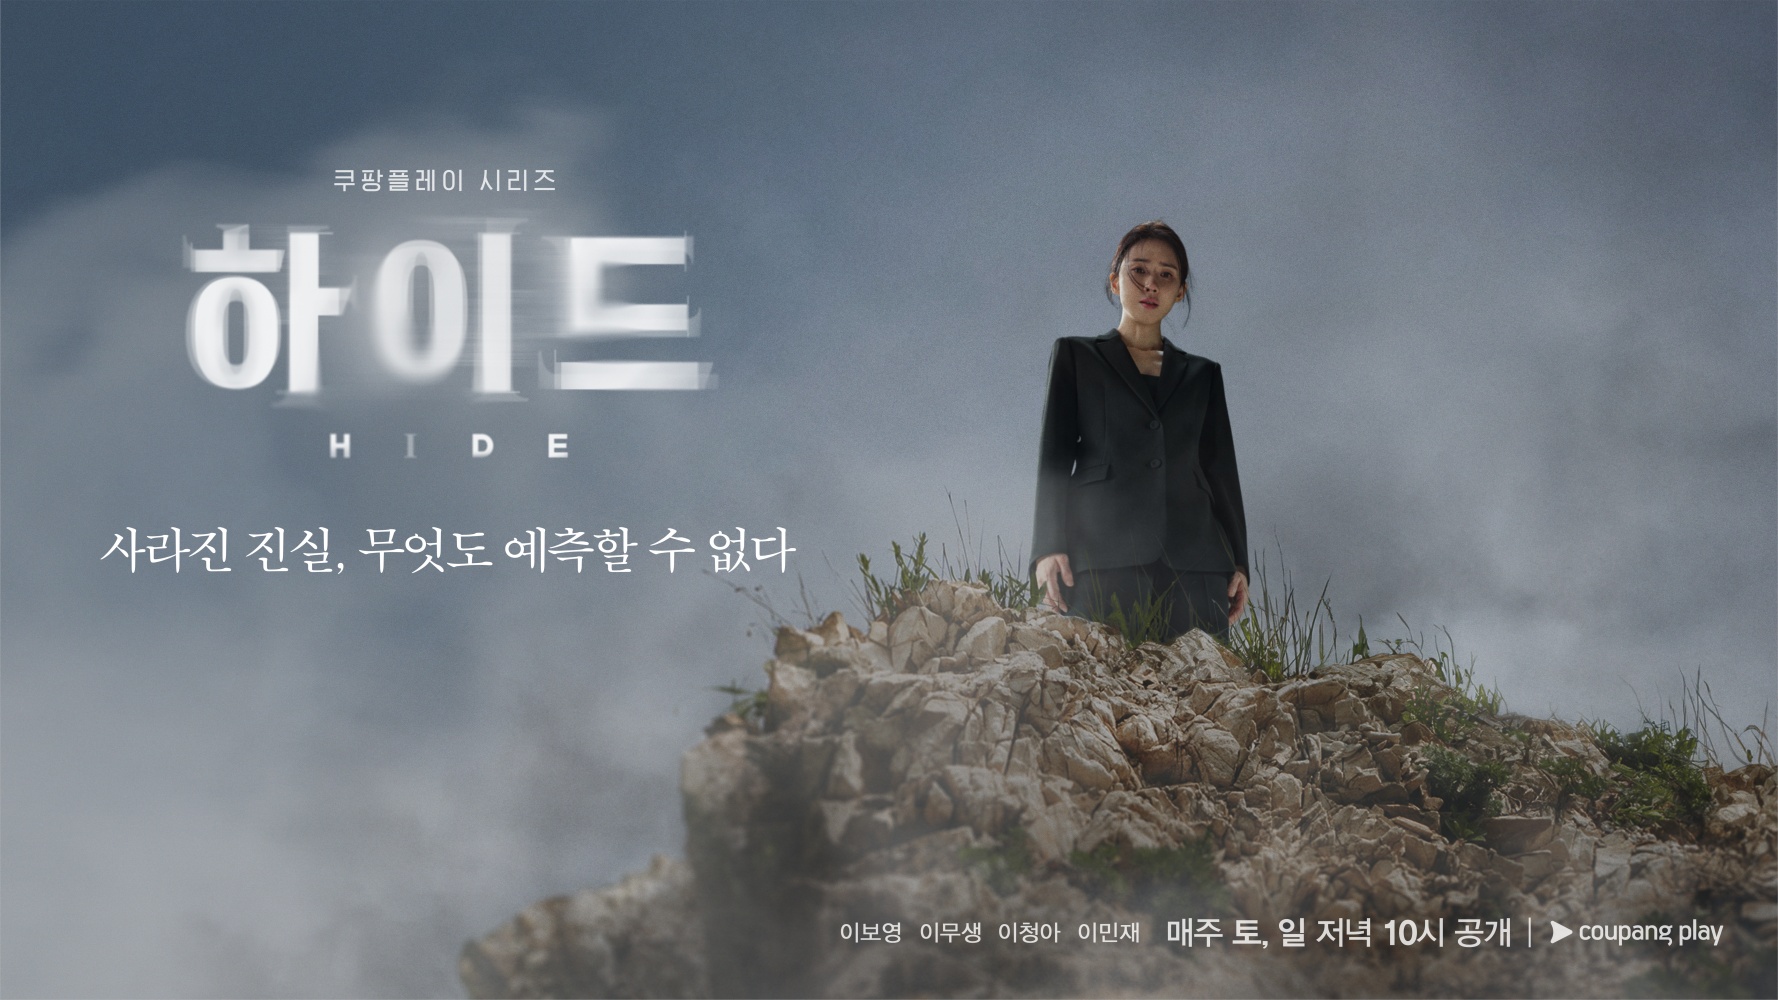 Lee Bo Young Is On The Edge Of A Cliff After Her Husband Disappears In “Hide”